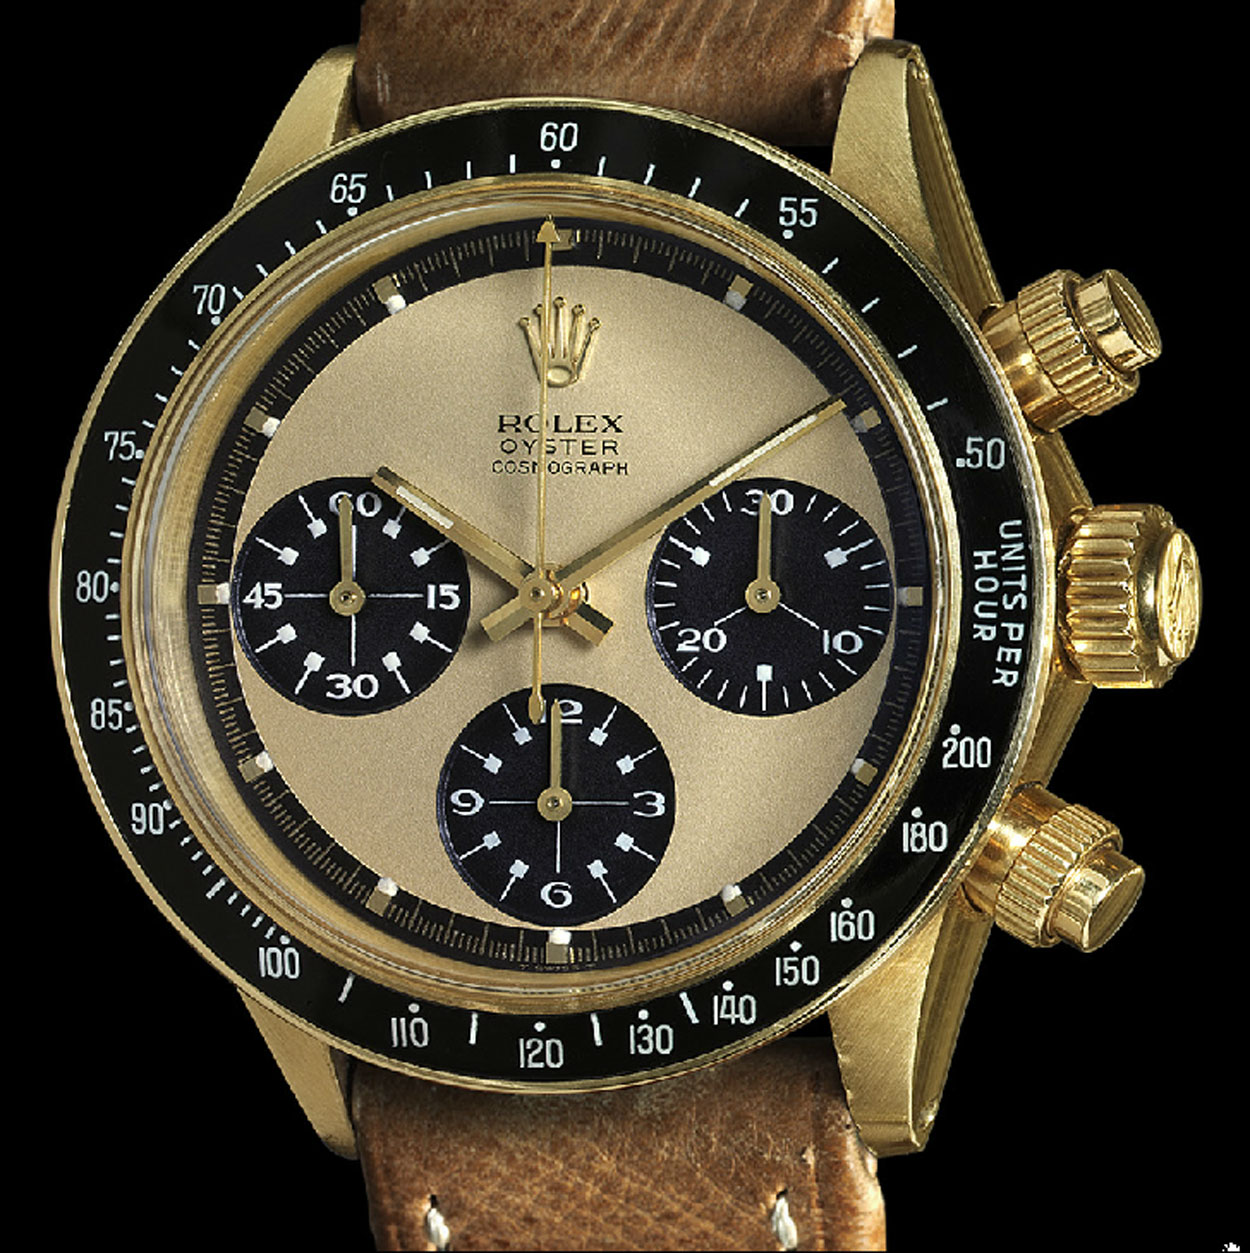 The Ultimate Rolex Vintage Daytona Book By Pucci Papaleo Rolex